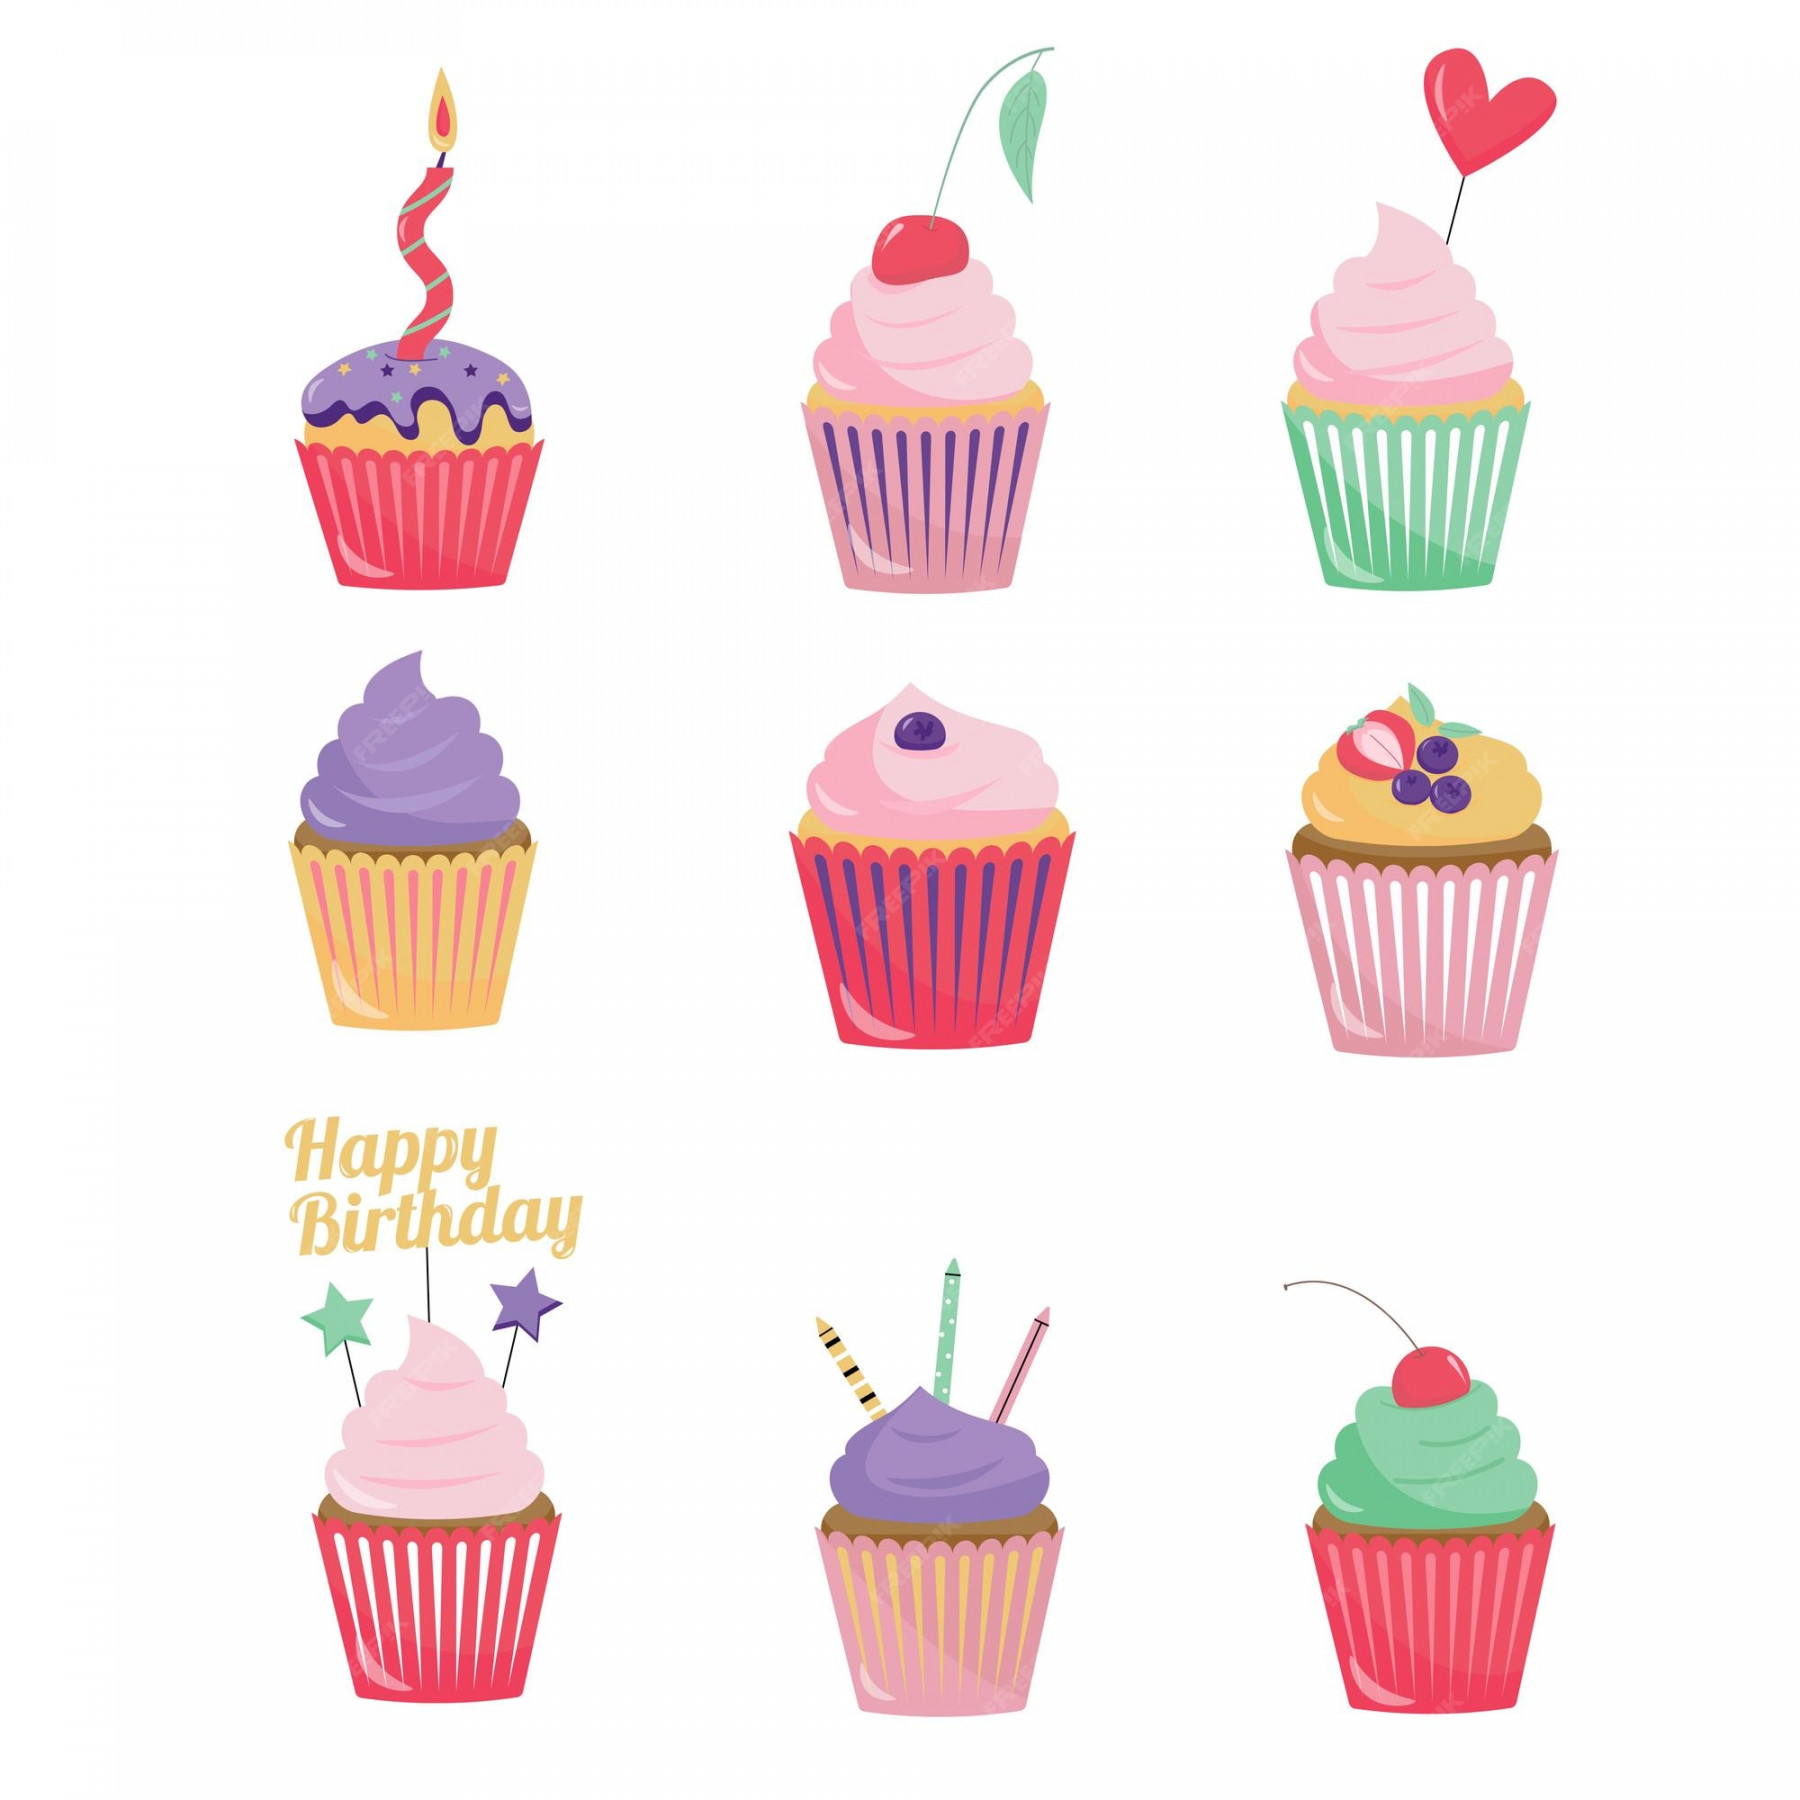 Premium Vector  A set of colorful holiday cupcakes